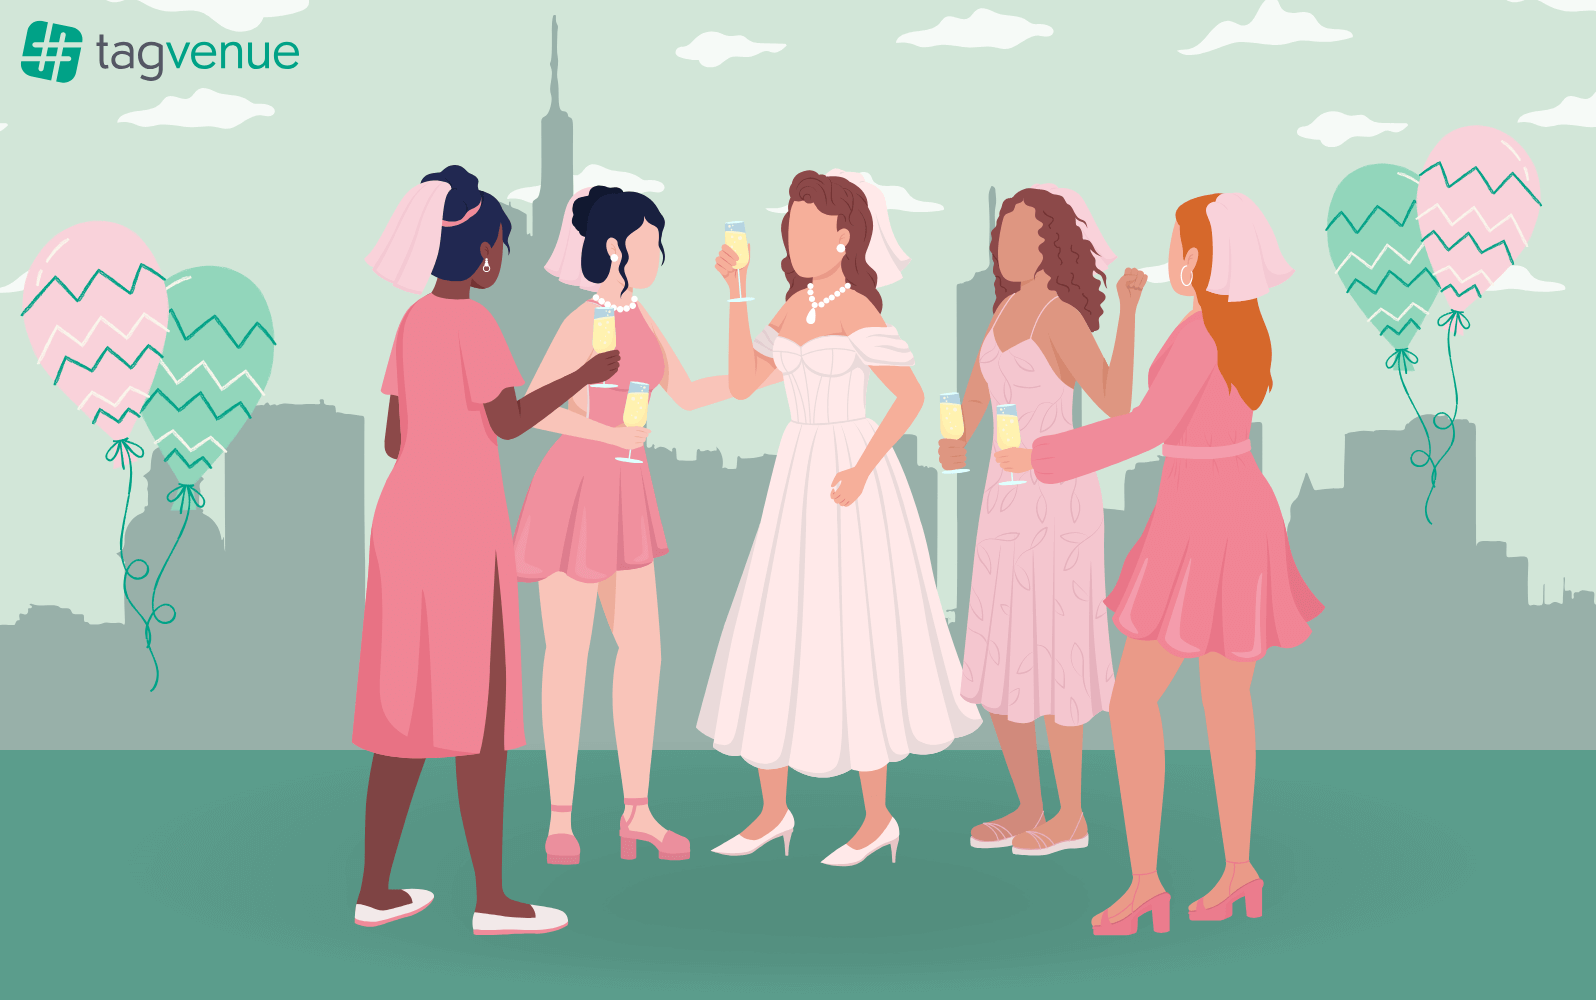 Empire State of Celebrations: Top 16 Bachelorette Party Ideas in NYC Every Bride Will Love